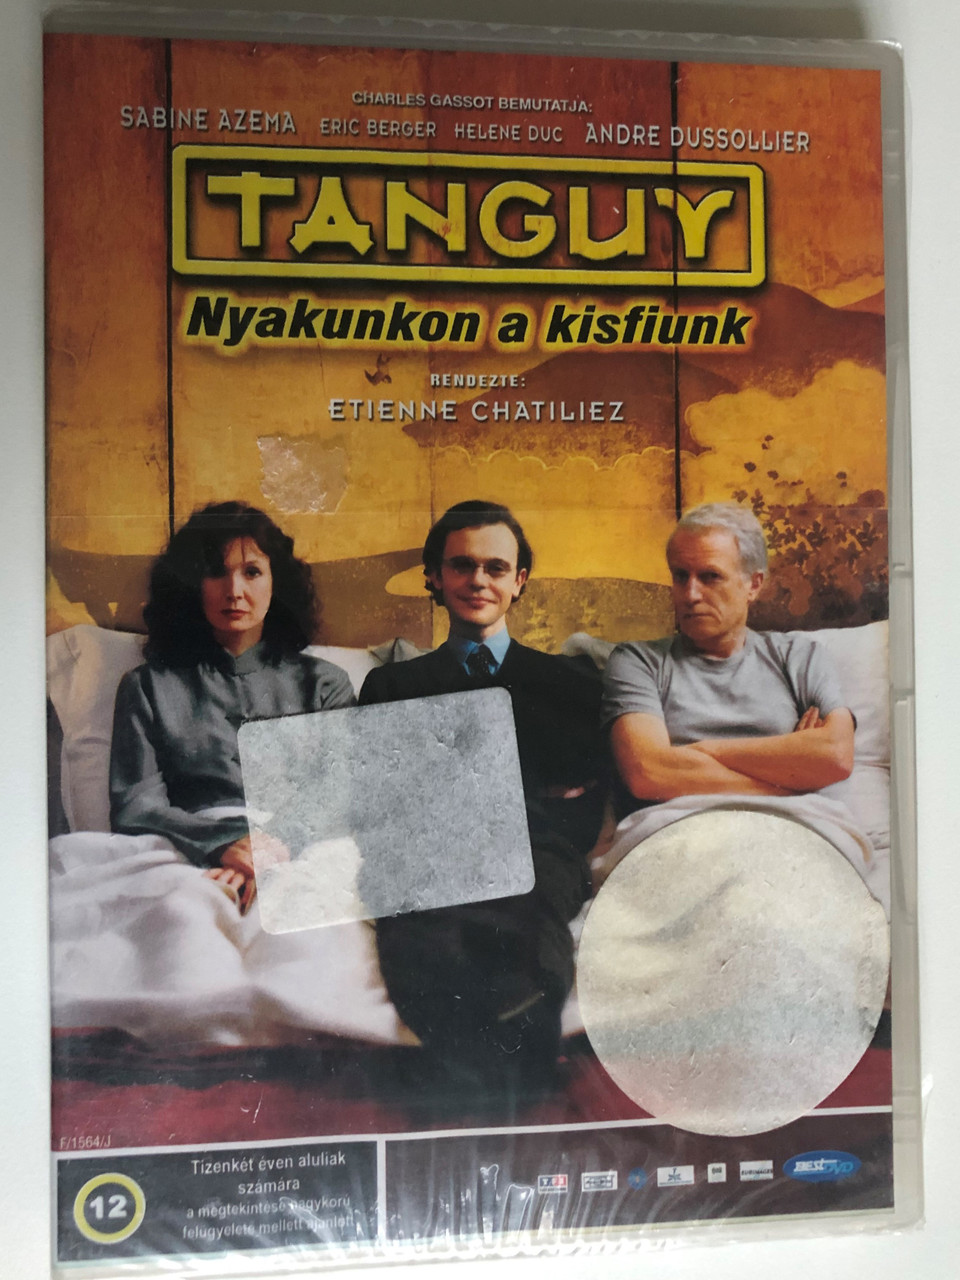 Tanguy DVD 2001 Nyakunkon a kisfiunk / Directed by Étienne Chatiliez /  Starring: Sabine Azéma, André Dussollier, Éric Berger / French black comedy  - bibleinmylanguage